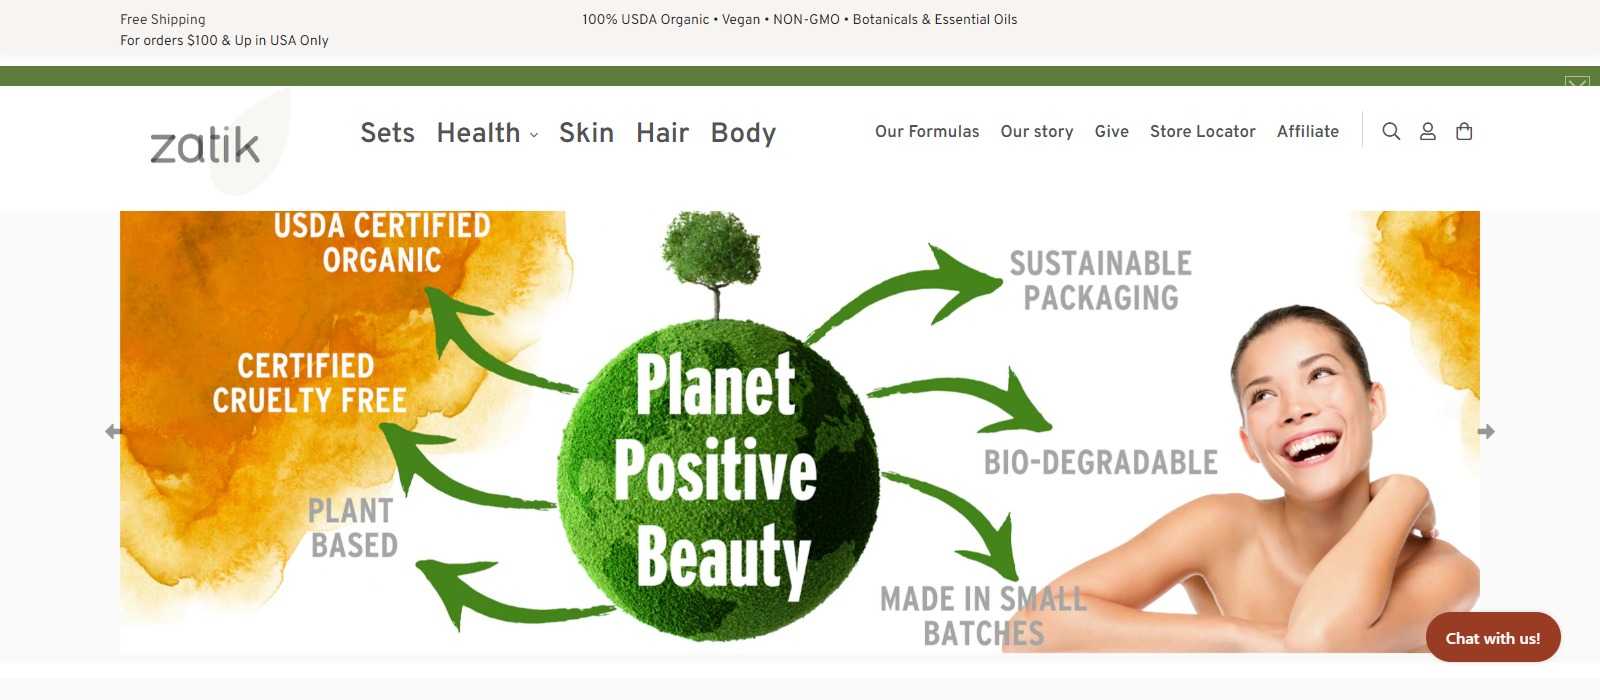 Zatik Naturals Affiliates Program Review: Earn Up To 20% Commission on each Sale